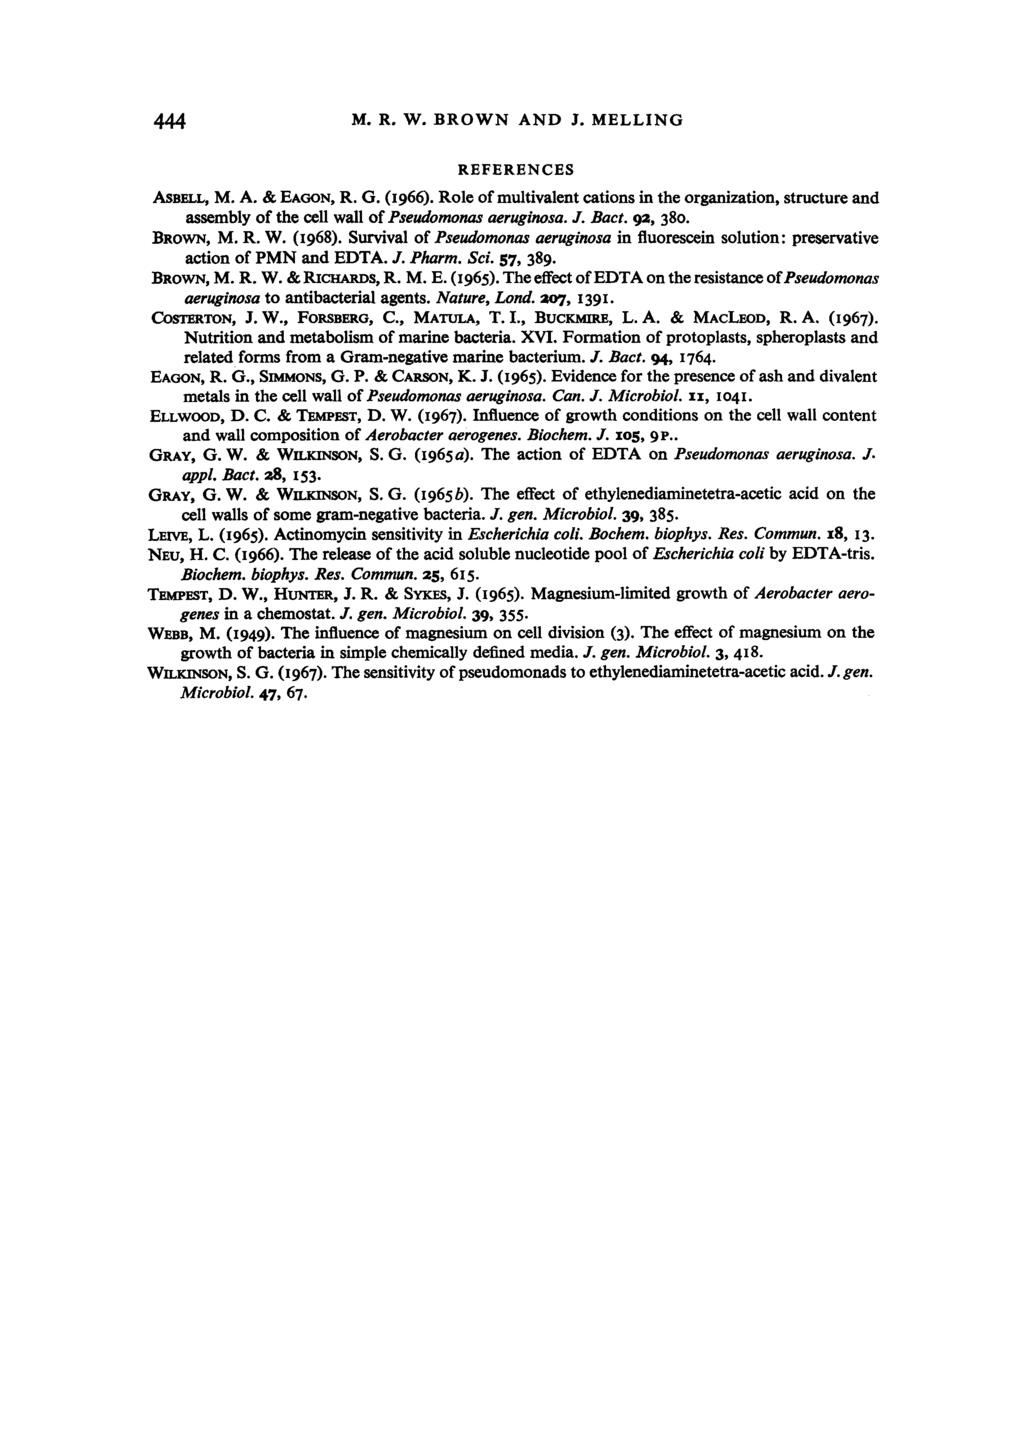 444 M. R. W. BROWN AND J. MELLING REFERENCES ASBELL, M. A. & EAGON, R. G. (1966). Role of multivalent cations in the organization, structure and assembly of the cell wall of Pseudomonas aeruginosa. J. Bact.